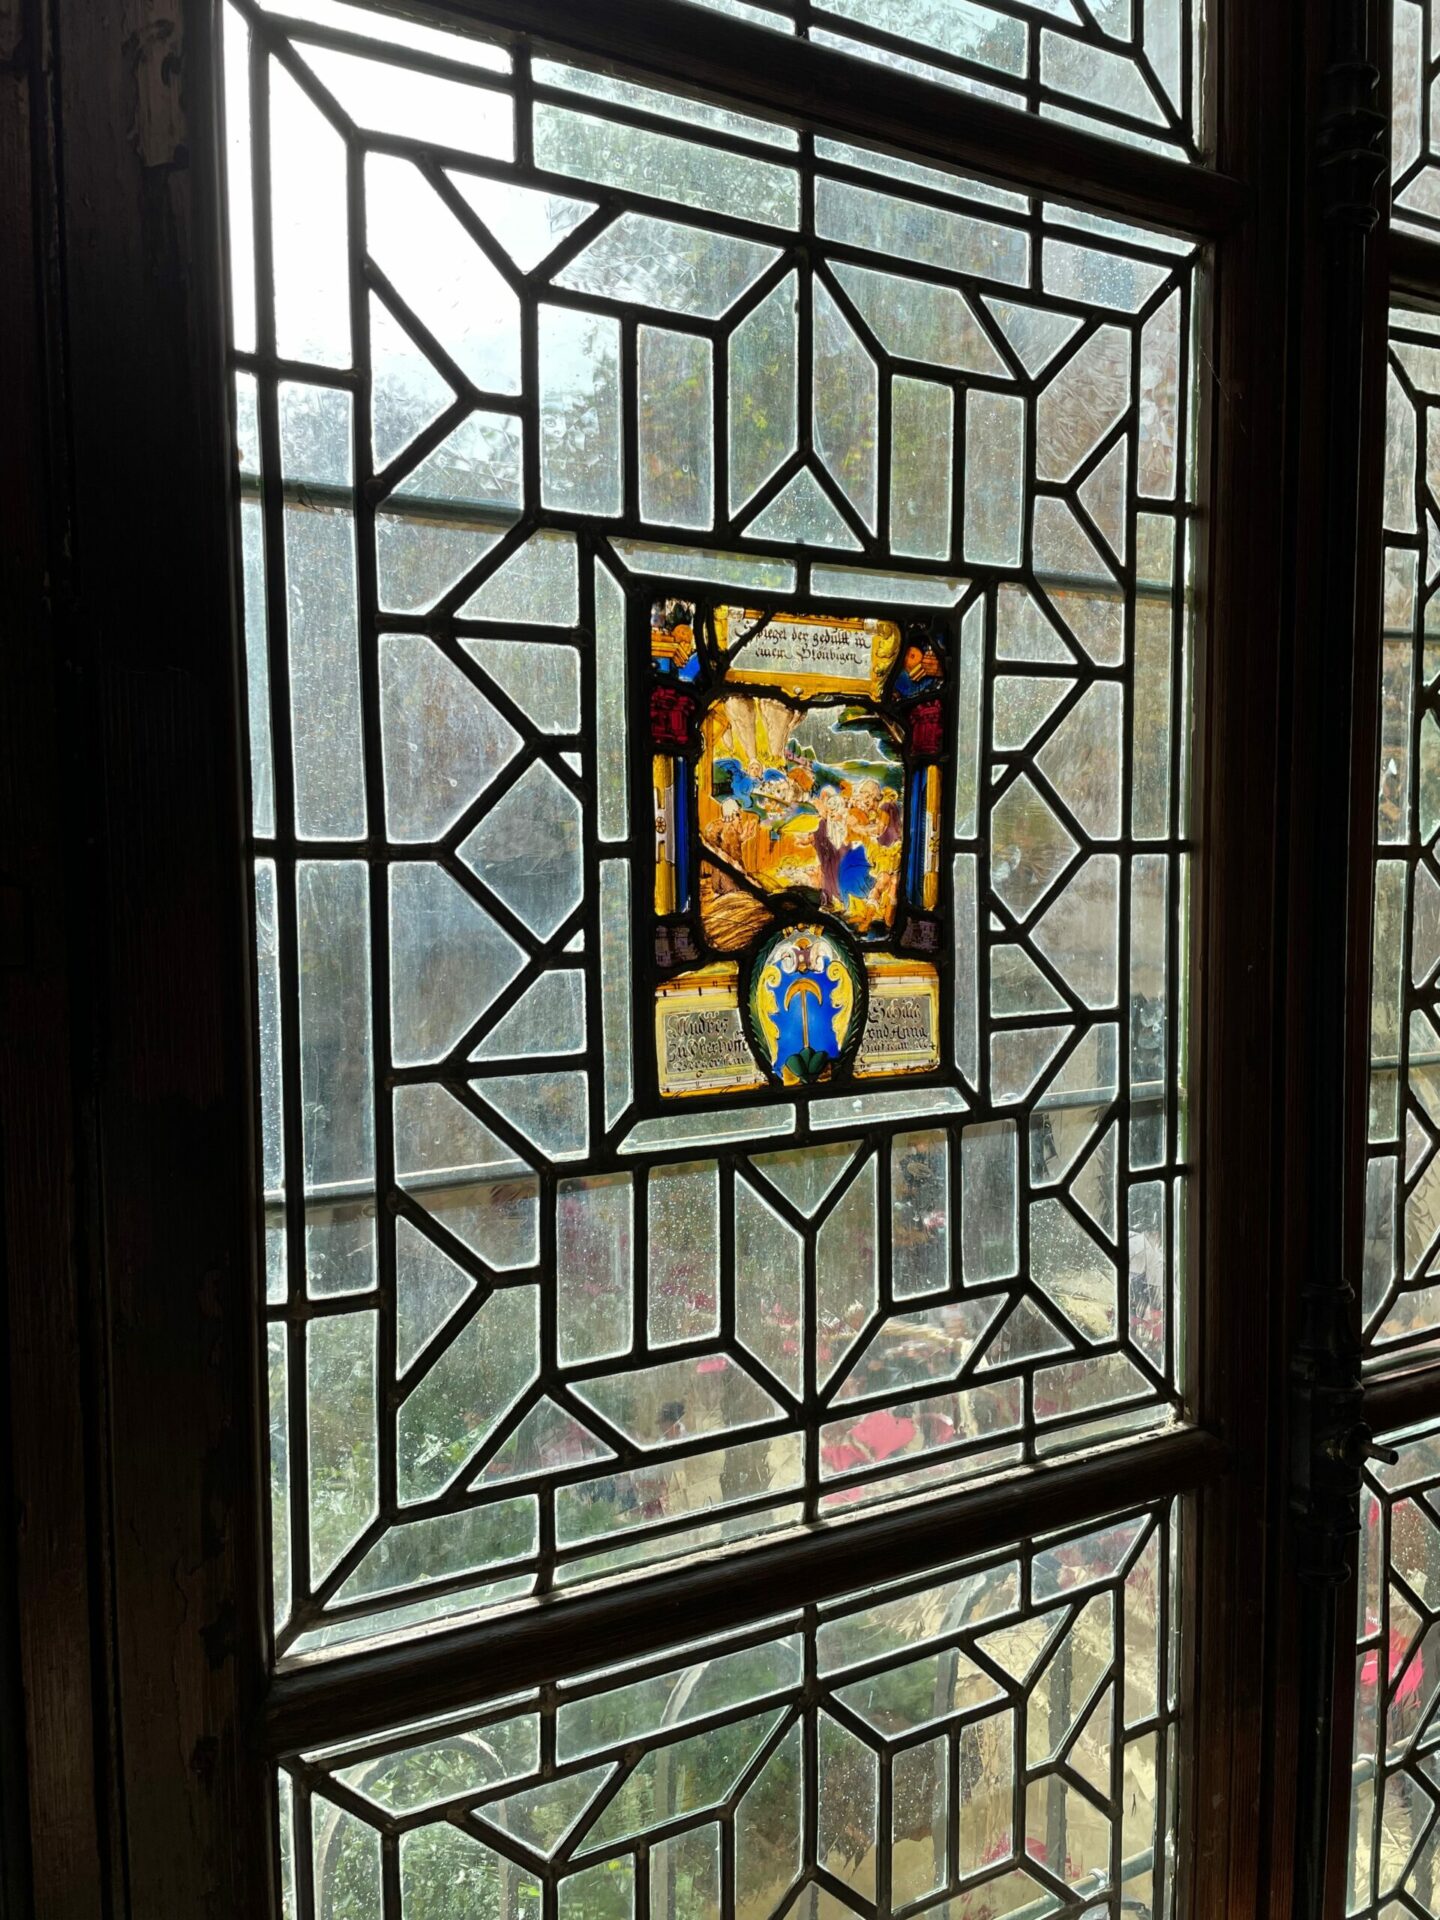 Some stained glass from the building where Victor Hugo's apartment is located.